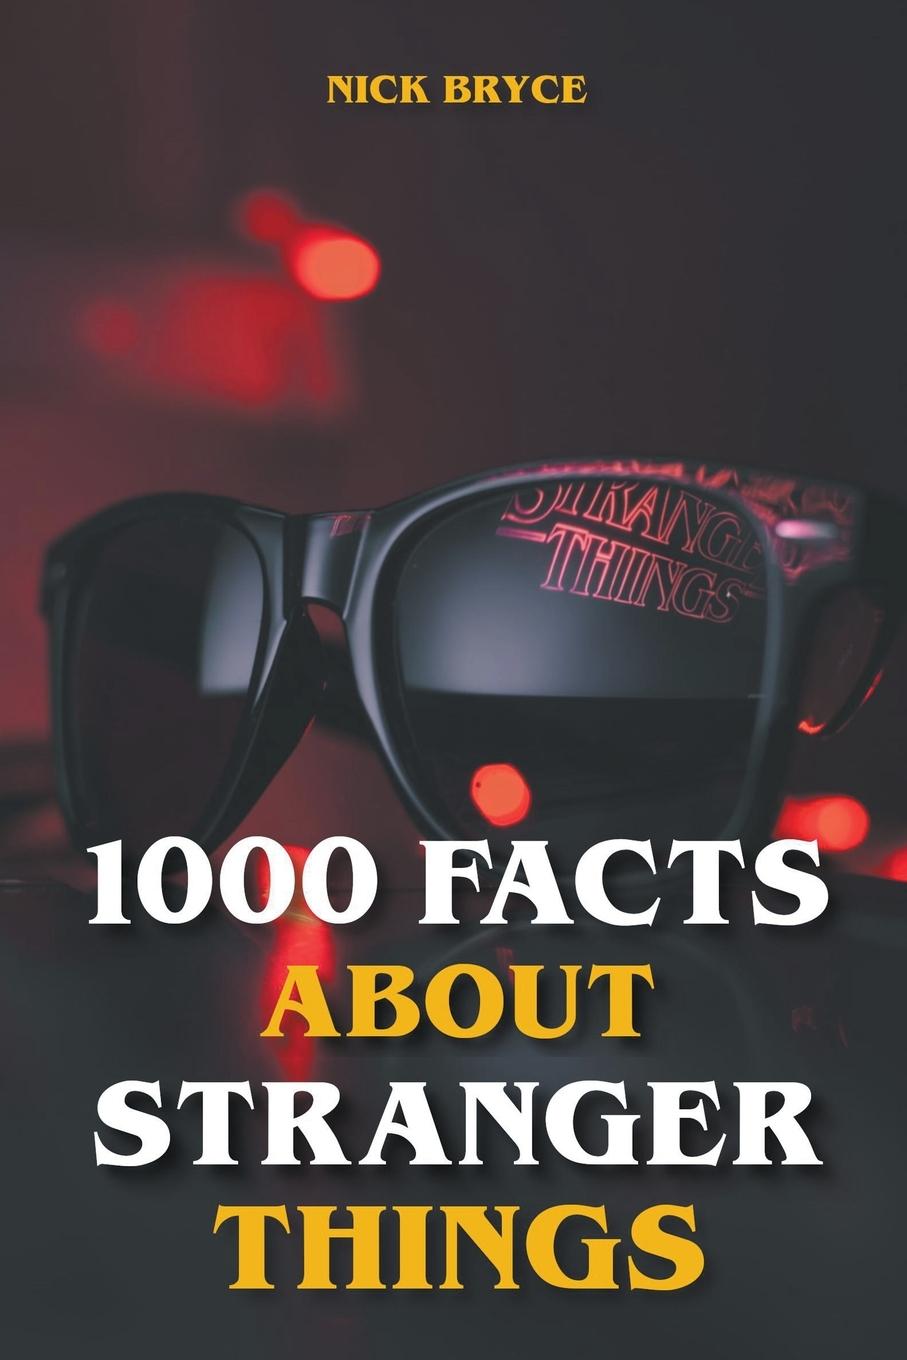 Book 1000 Facts About Stranger Things 